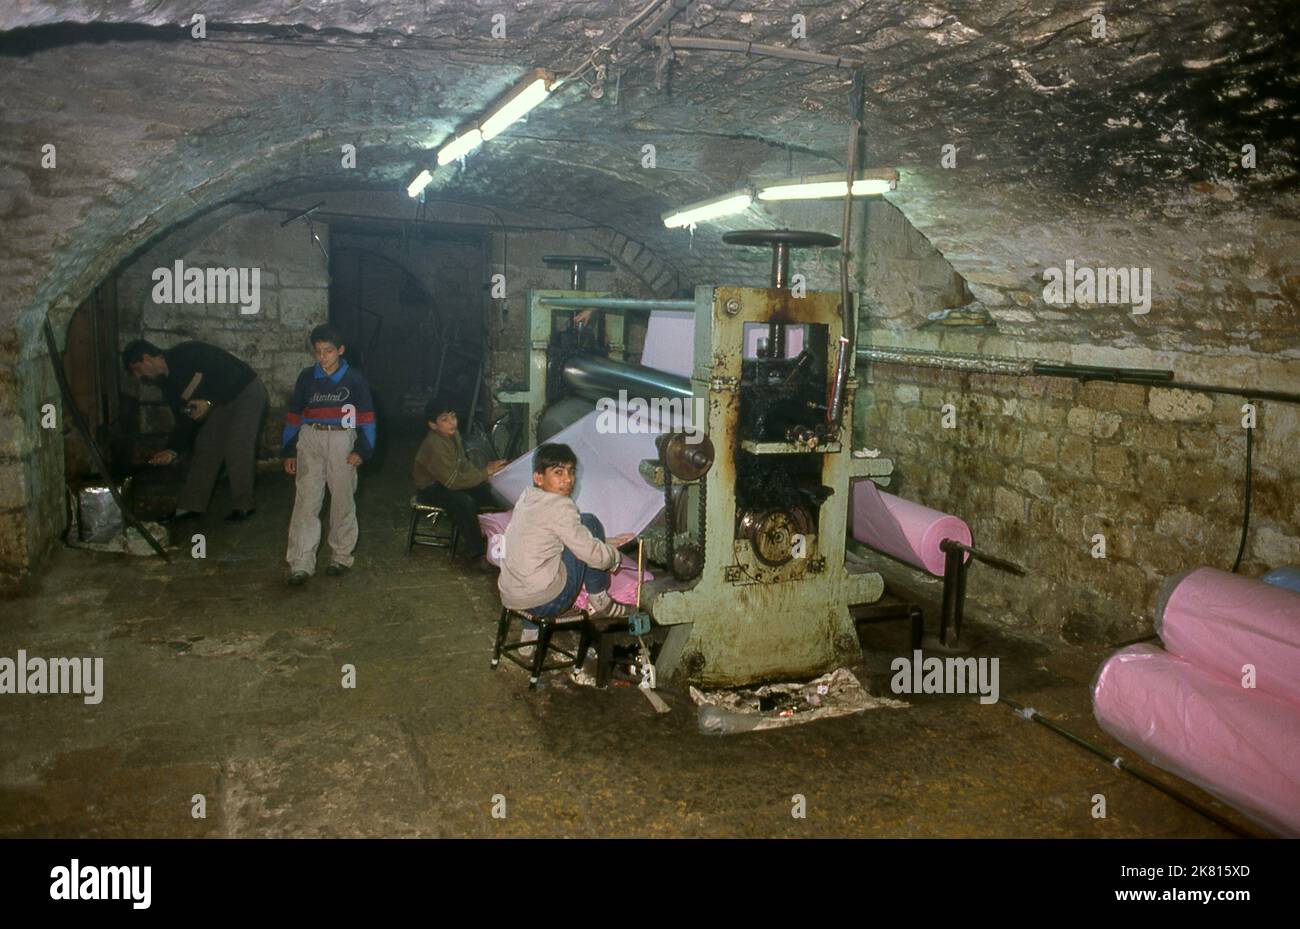 Syria: Subterranean cloth dyeing operation in the ancient Great Bazaar, Aleppo (1997). Aleppo's Great Bazaar (in Arabic, suq or souq) was rebuilt first by the Egyptian Mamelukes who drove out the Mongols, and then, after 1516, by the Turks who incorporated Aleppo into the Ottoman Empire. During the Syrian Civil War, which started in 2011, Aleppo's historic suqs suffered serious damage.  Aleppo, the second city of Syria is possibly the longest continually inhabited settlement in the world. Its Arabic name, Halab, is mentioned in Semitic texts of the third millennium BCE. Stock Photo